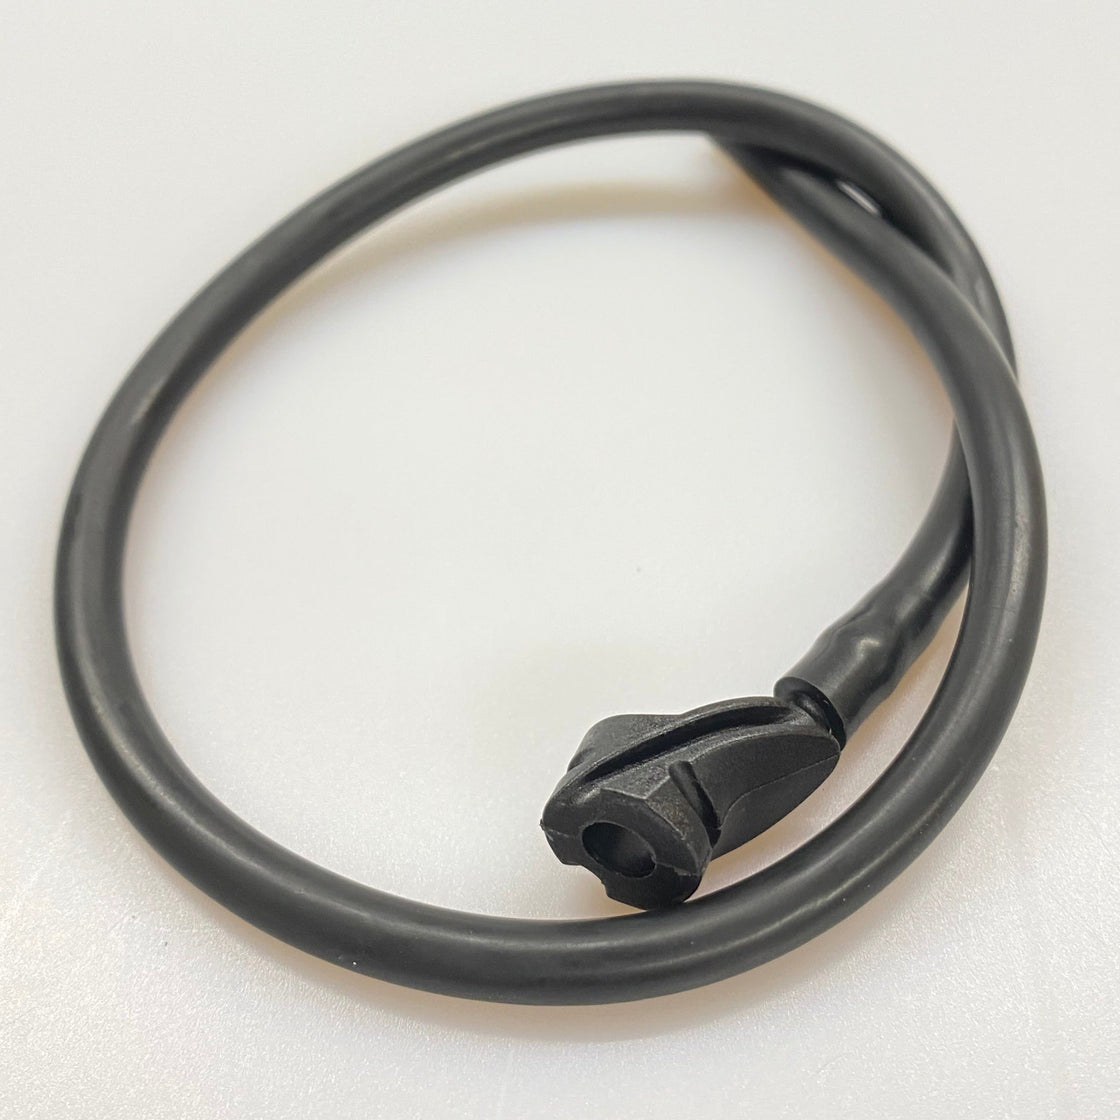 3/16 Peep Sight with Silicon Rubber Tubing